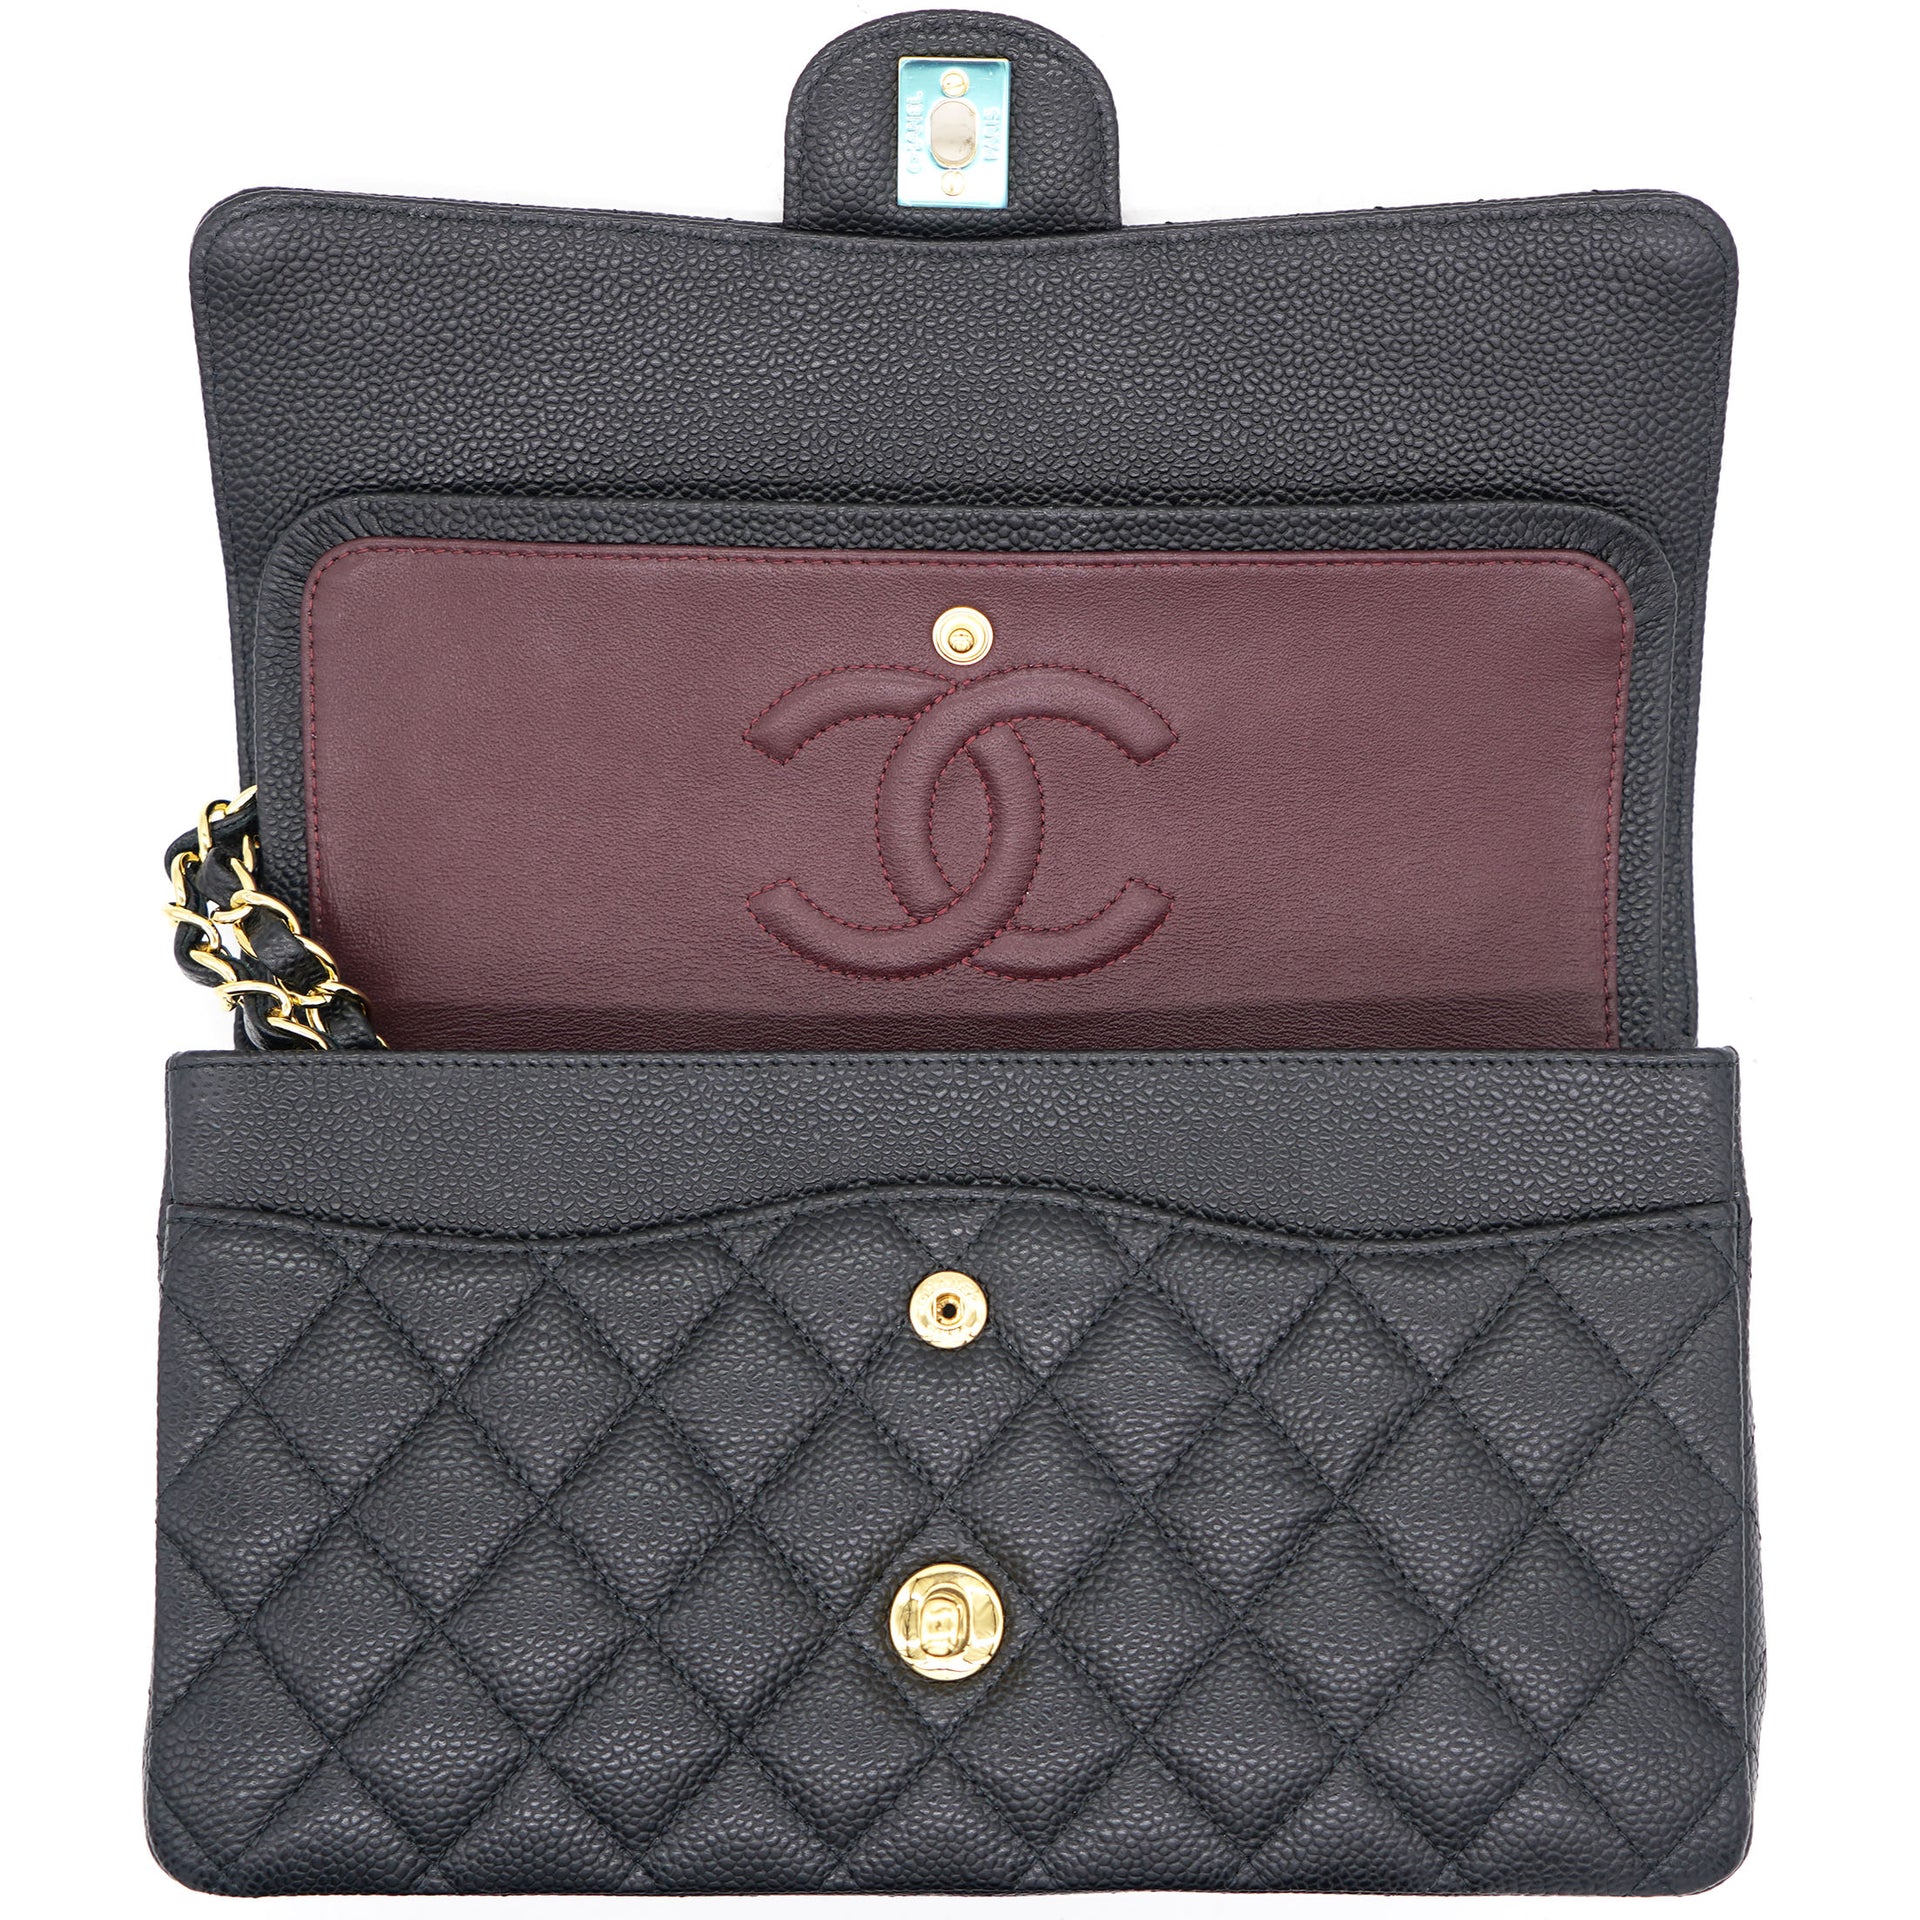 Black Quilted Caviar Leather Medium Classic Double Flap Bag